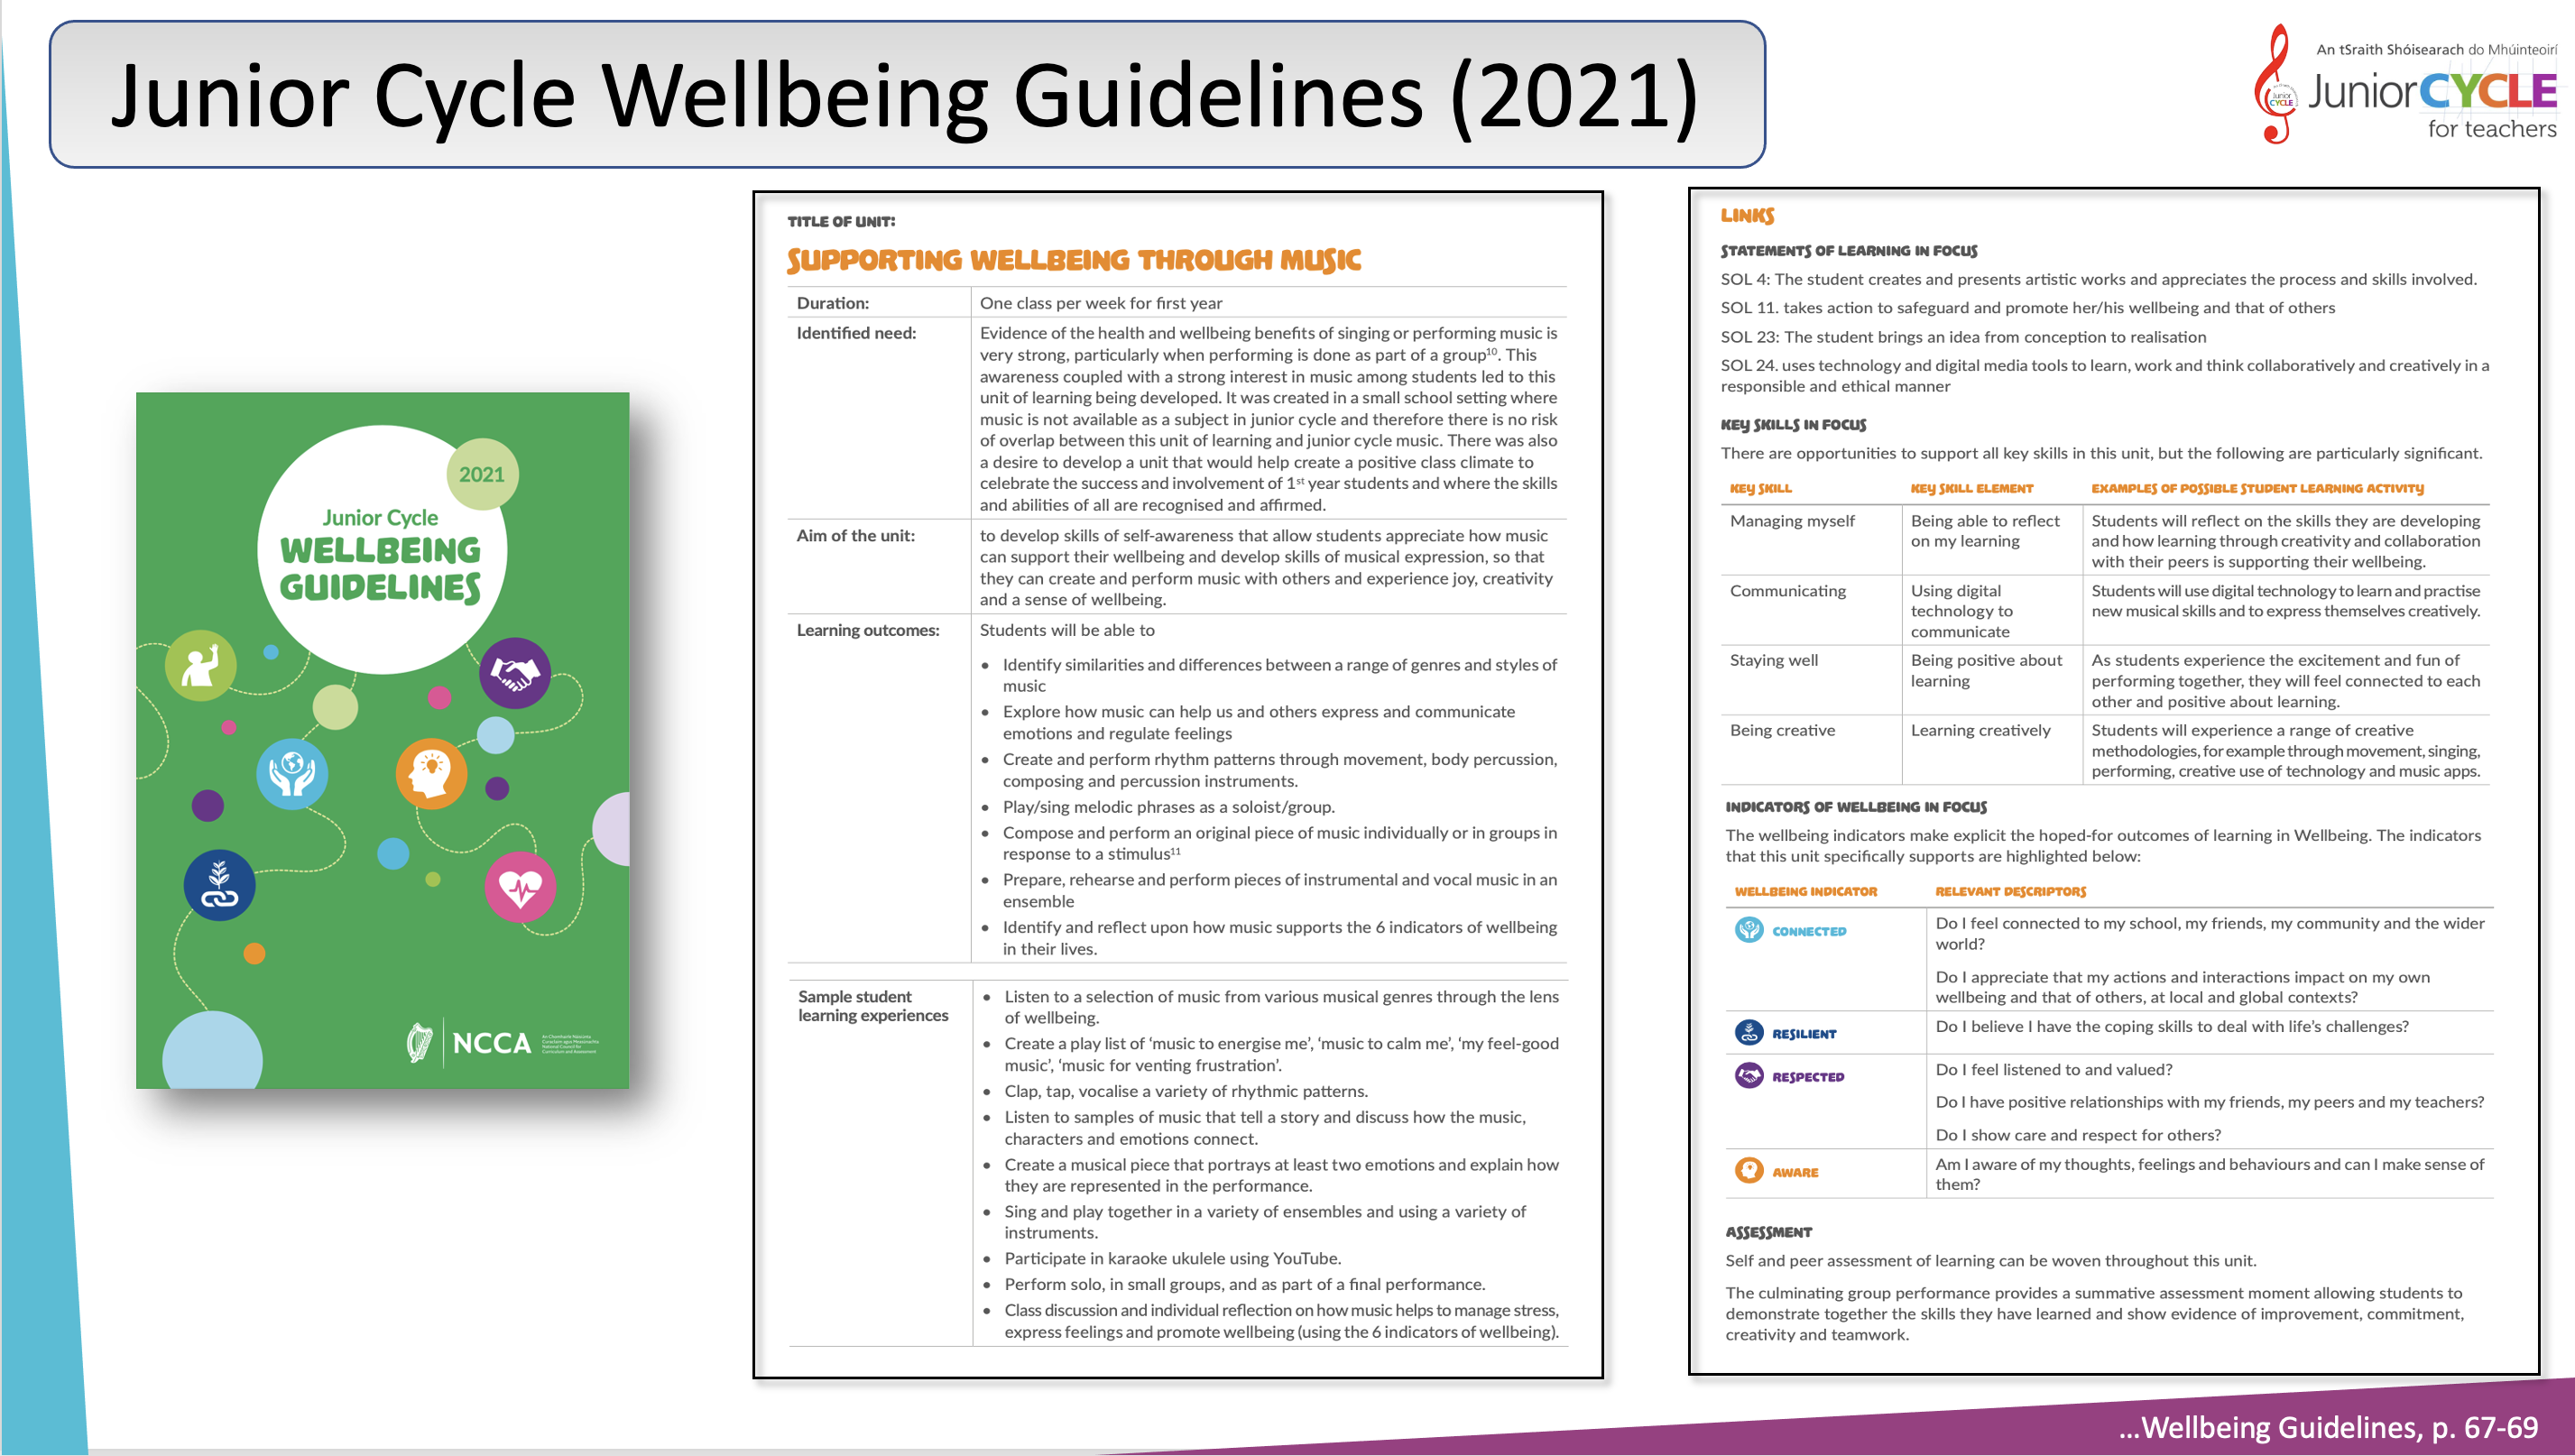 Wellbeing Guidelines 2021 and Support Wellbeing Through Music